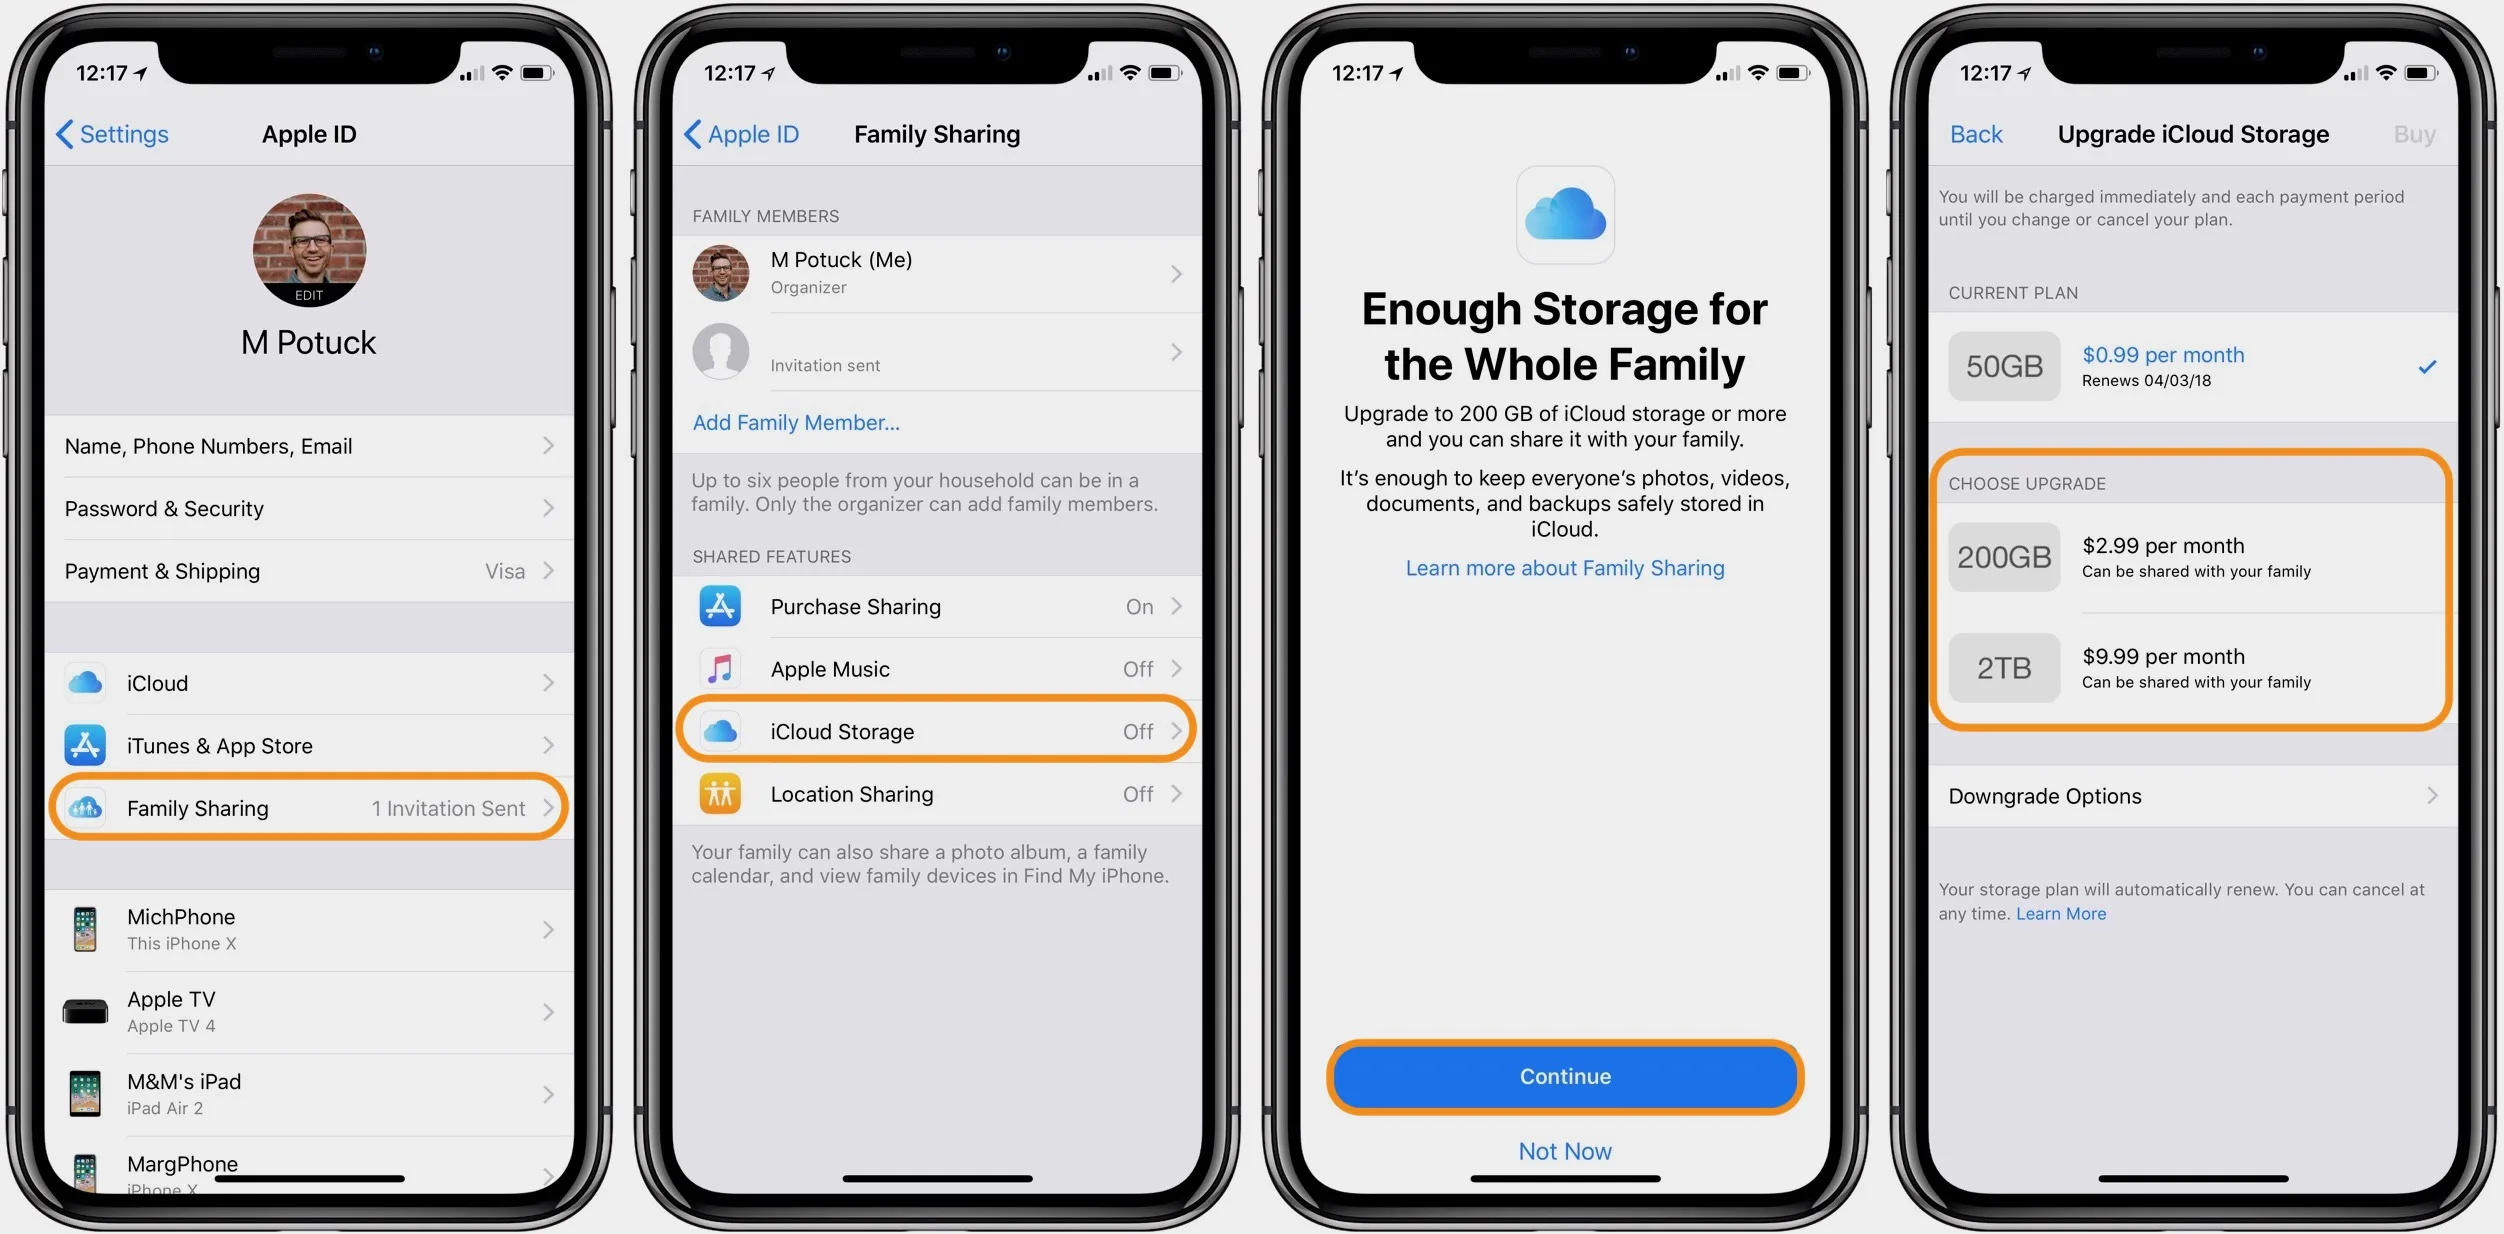 How to Share iCloud Storage from iPhone or iPad